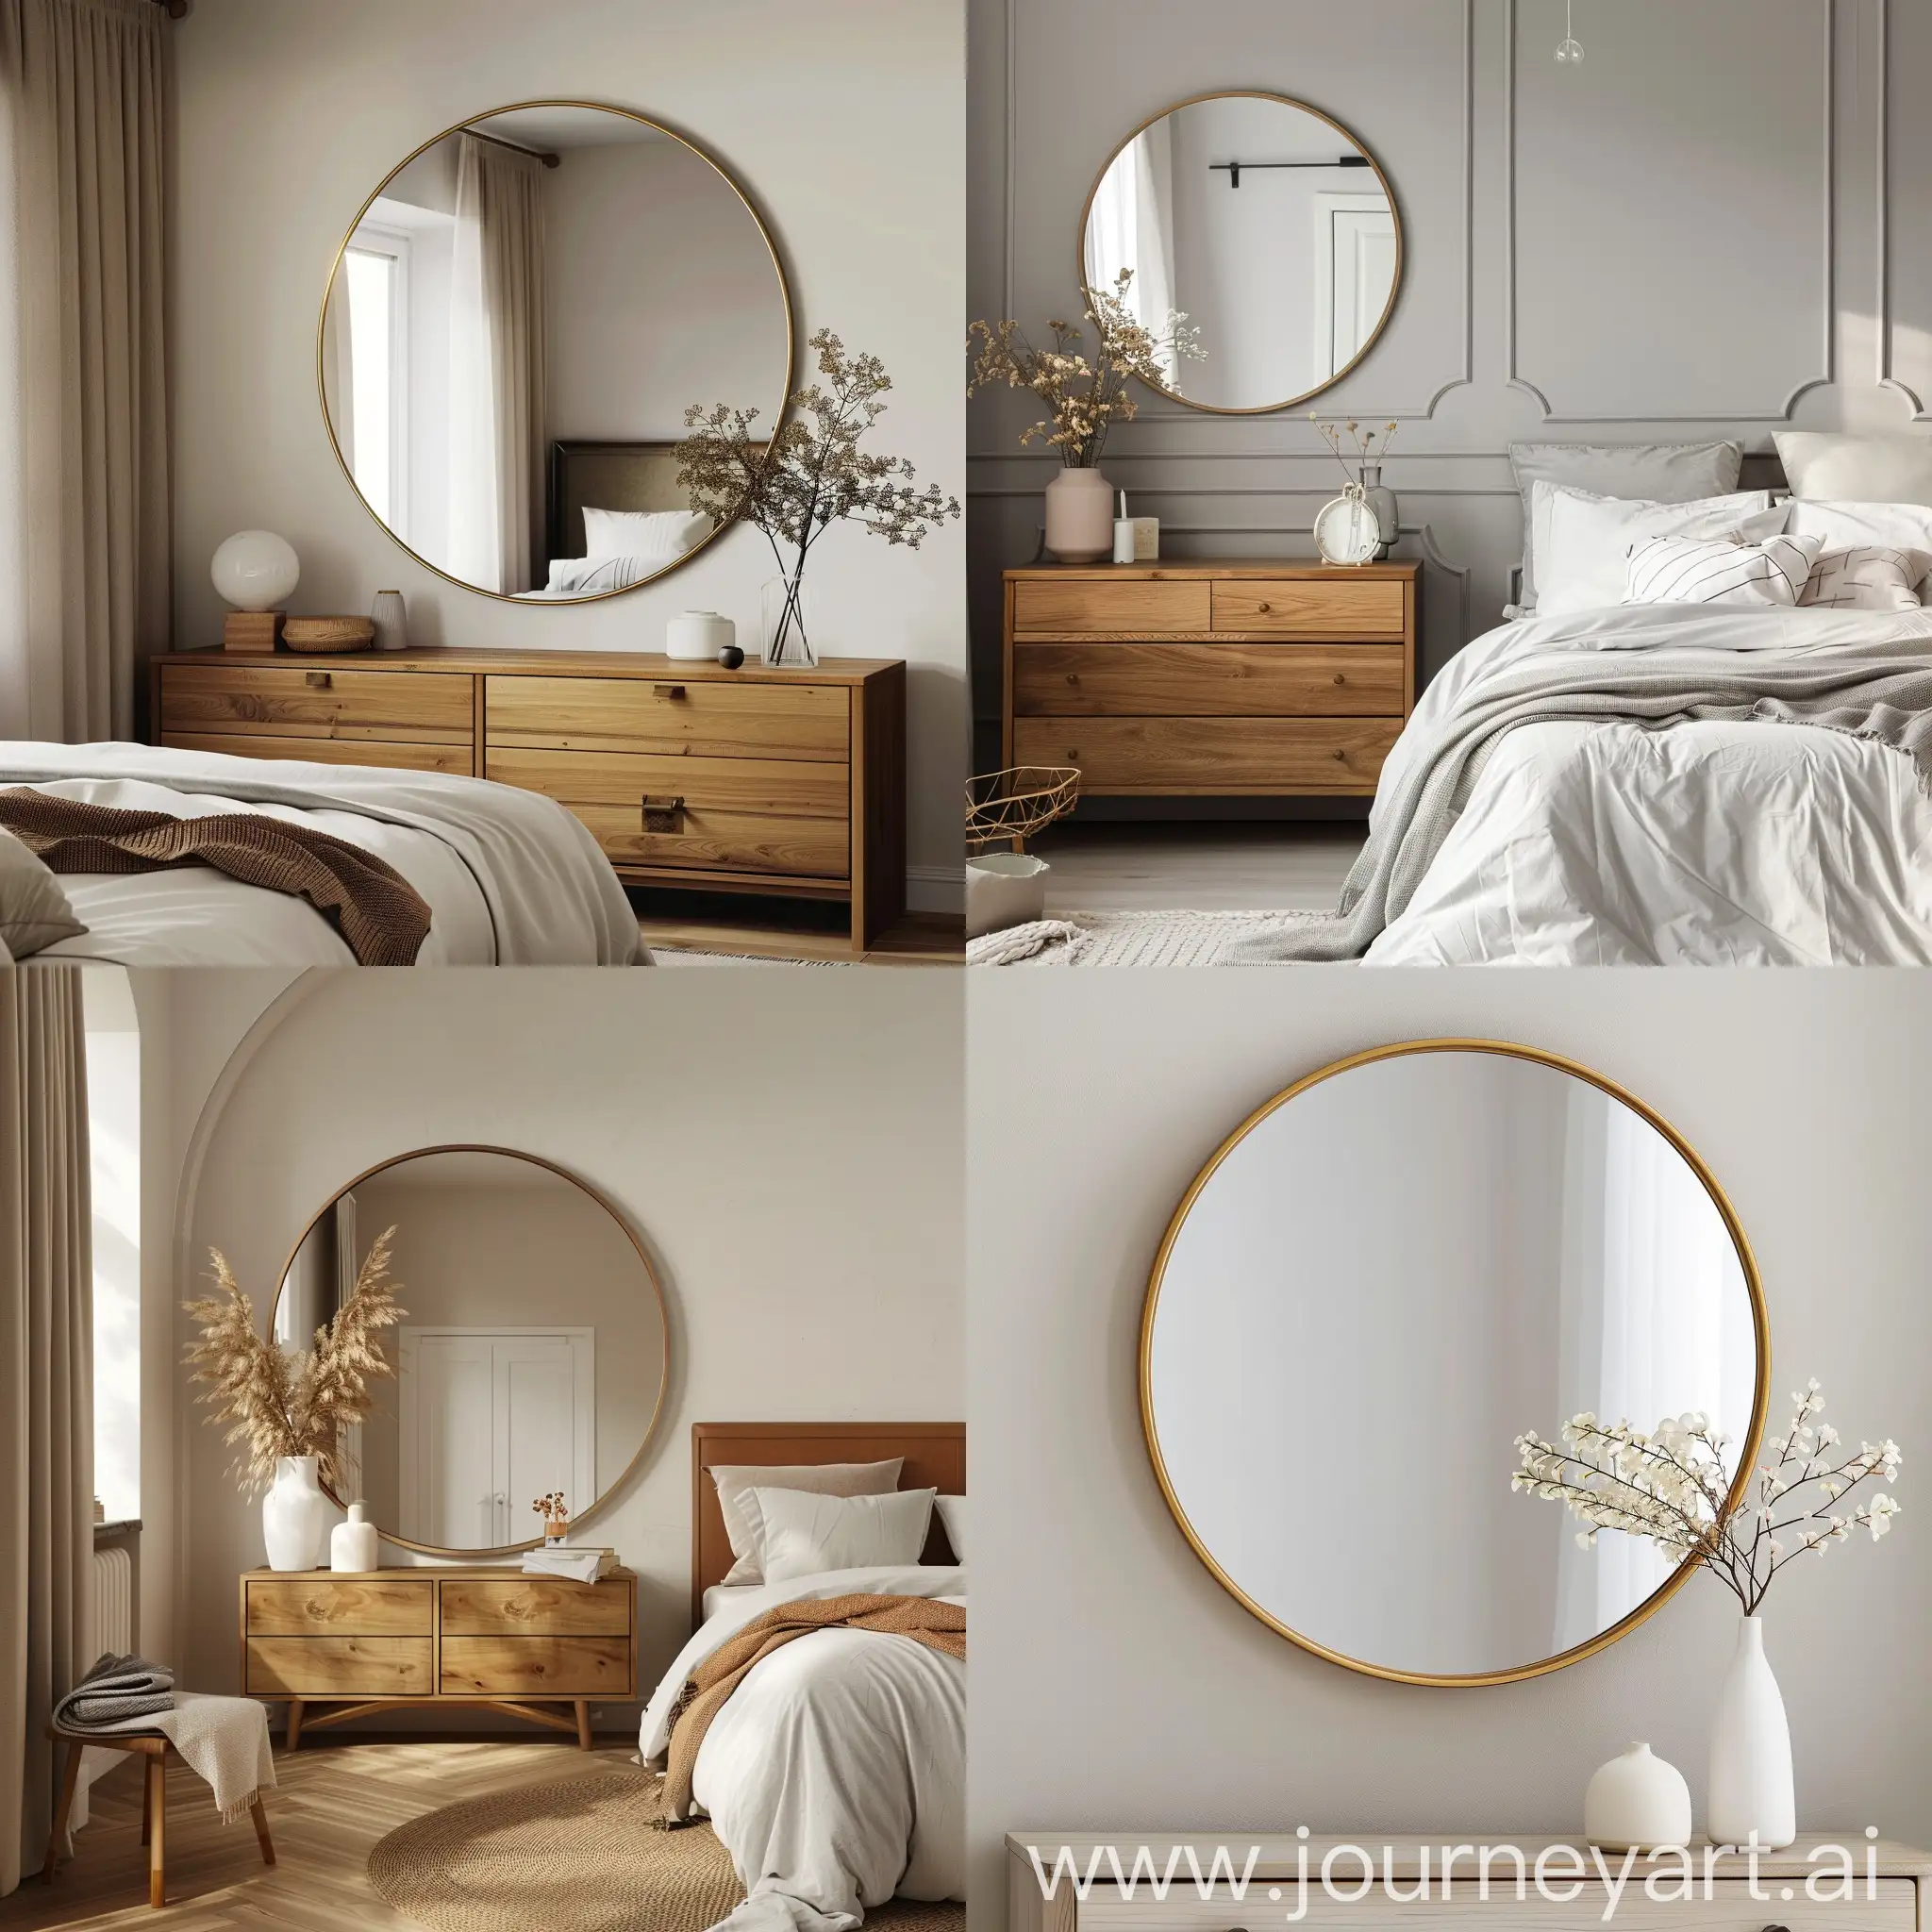 Transform-Your-Bedroom-with-a-Stylish-Decorative-Mirror